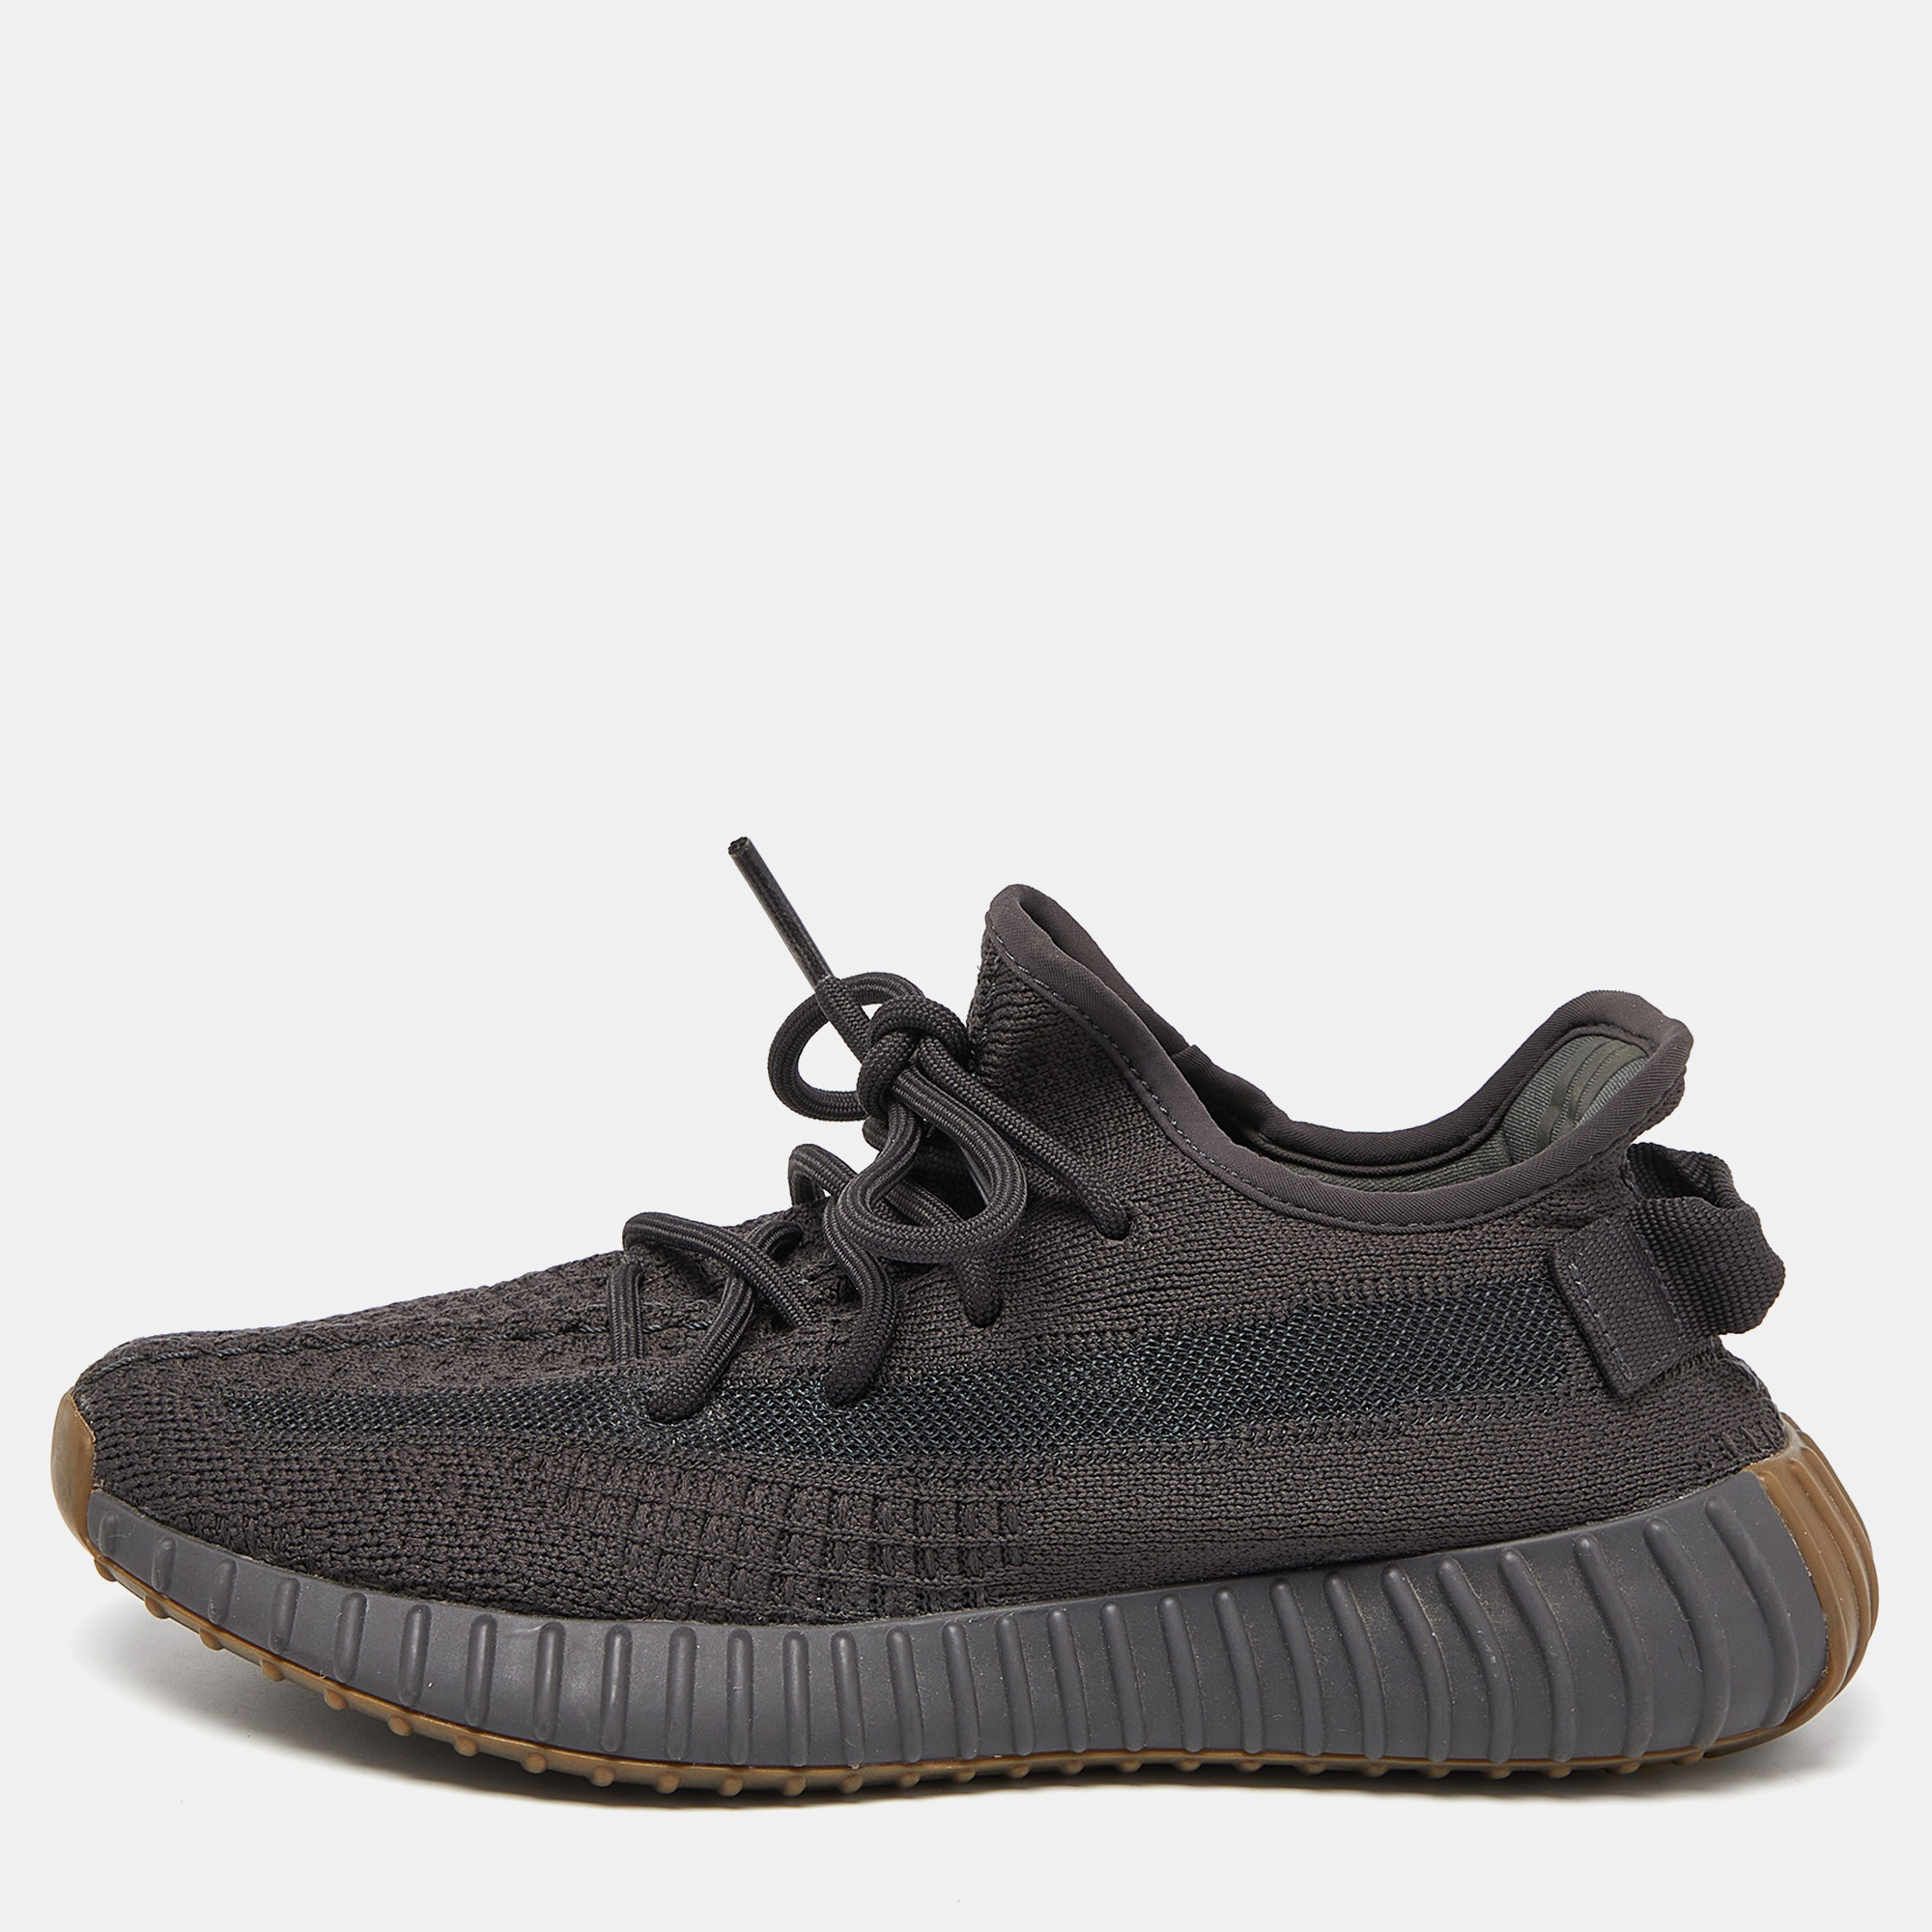 Yeezy X Adidas Black Knit Fabric Boost 350 V2 Cinder Sneakers Size 38 2/3